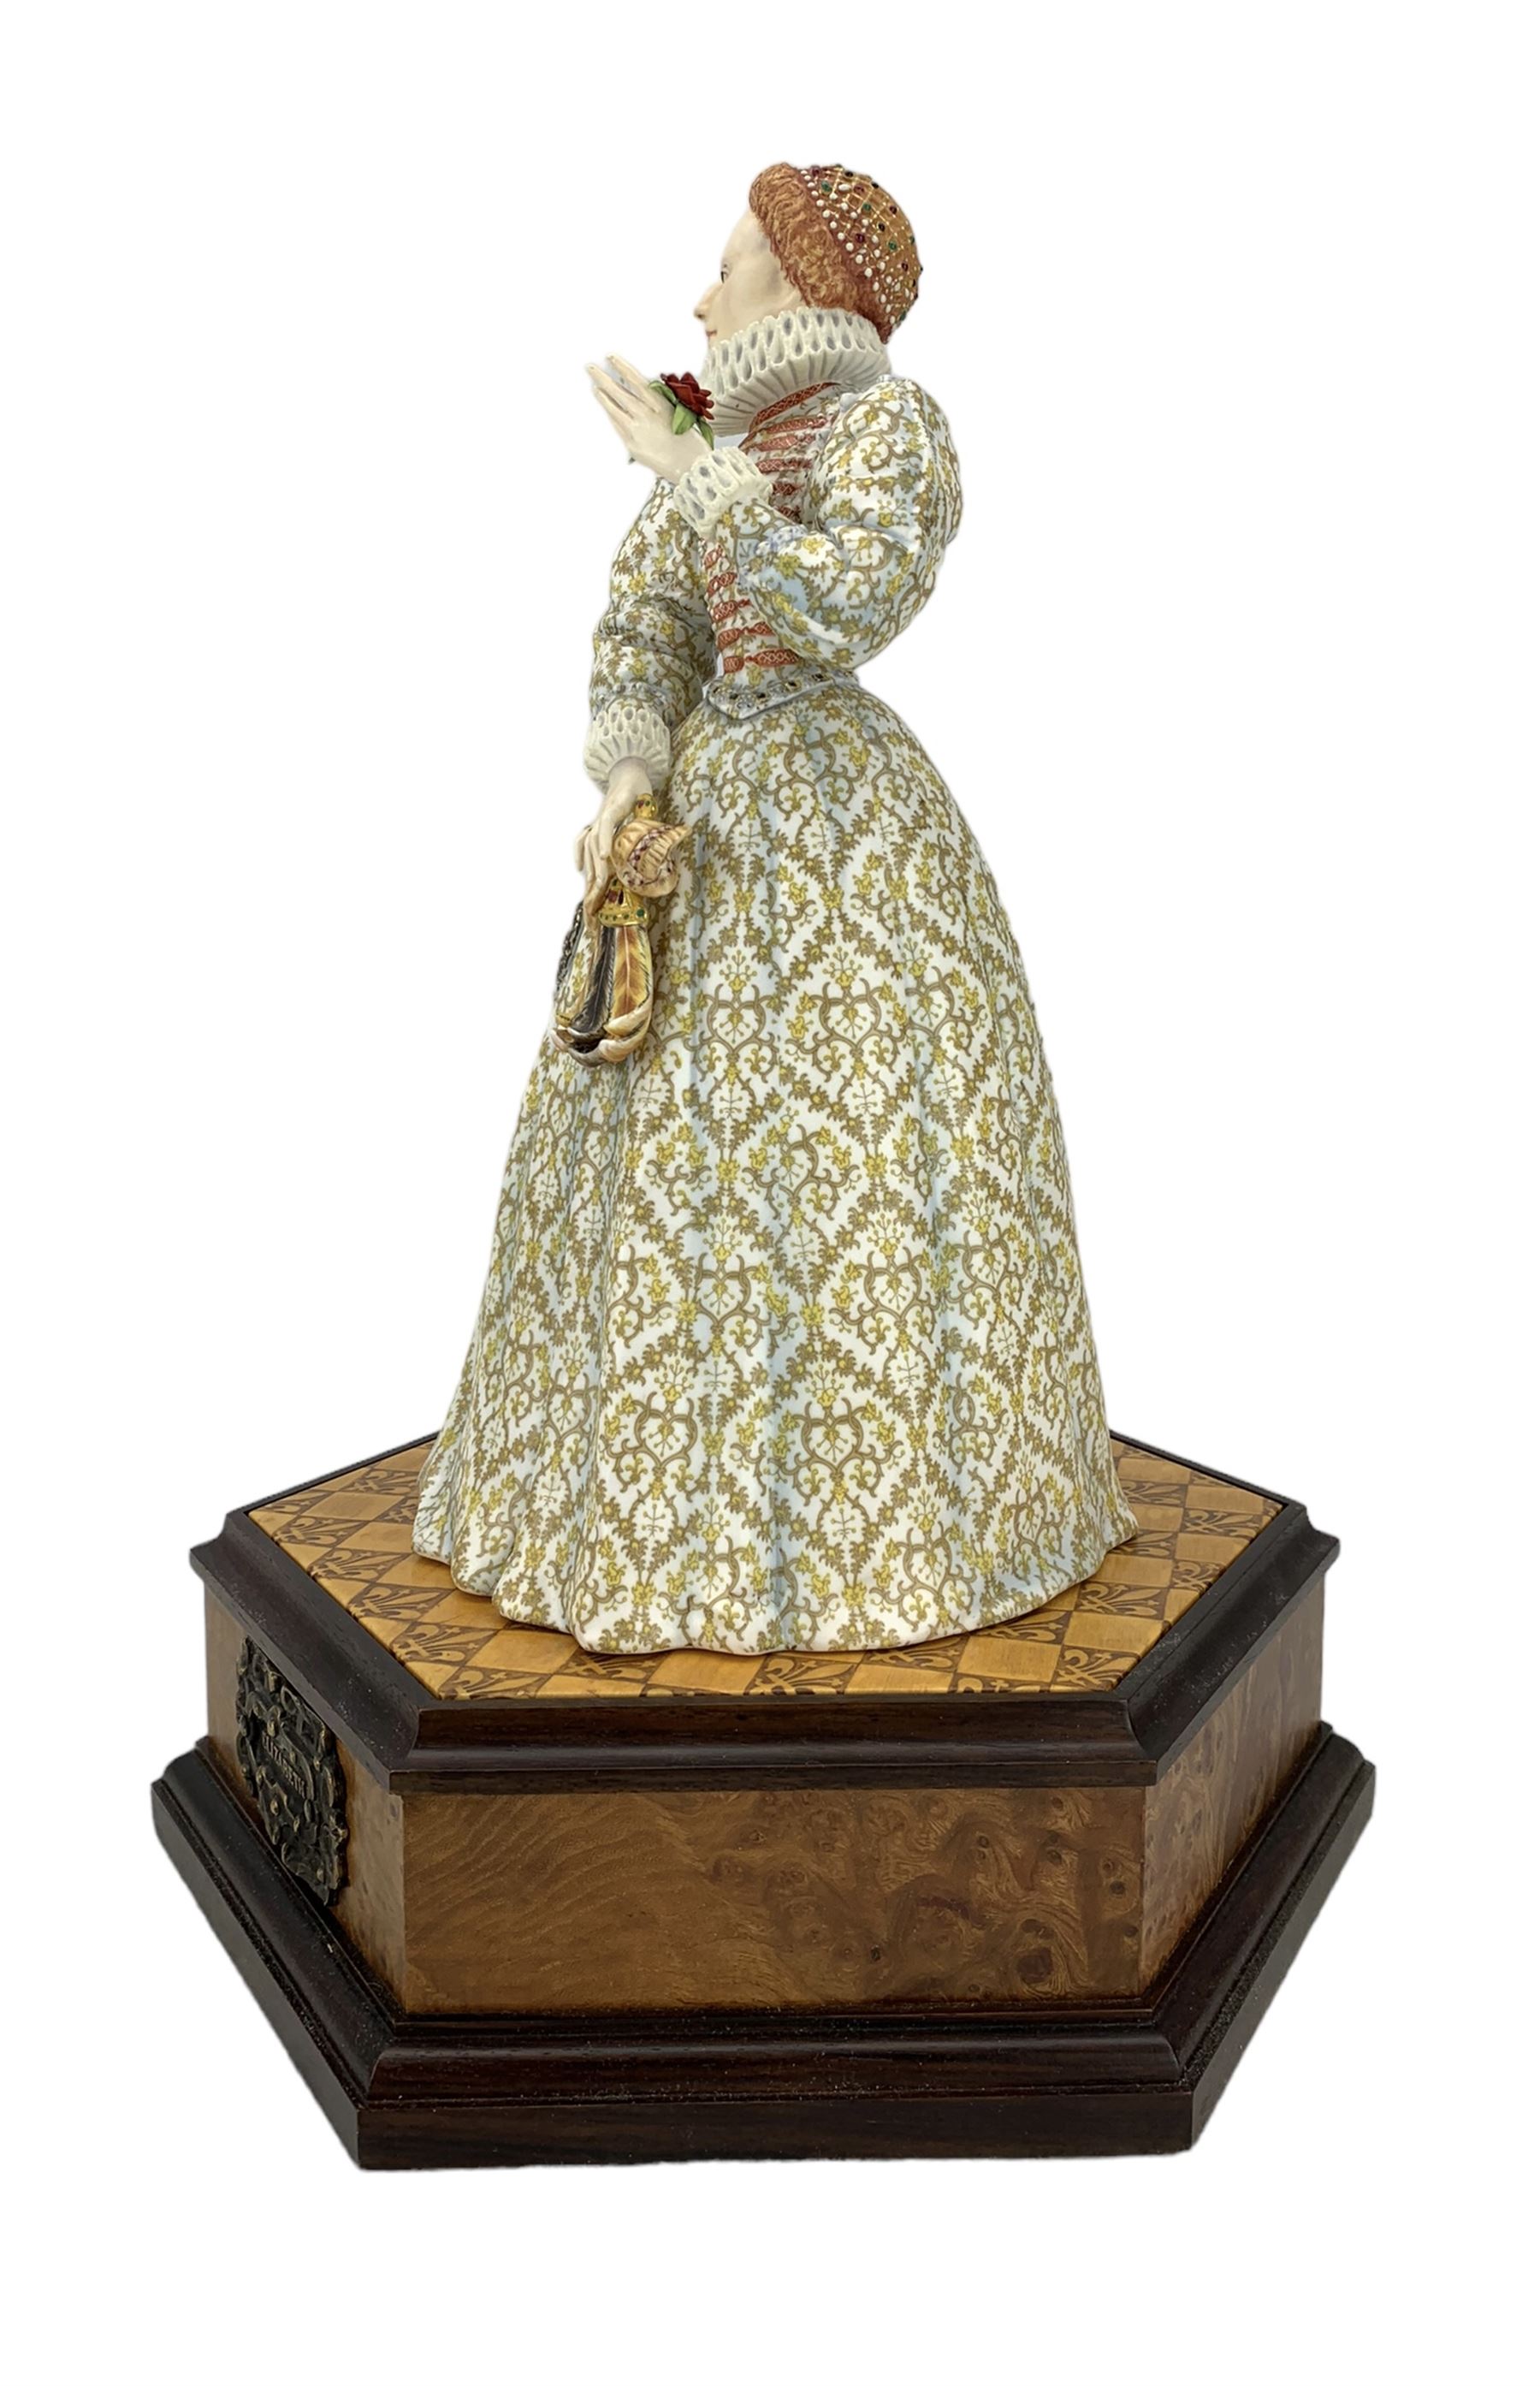 Royal Worcester limited edition figure Queen Elizabeth 1 from the Queens Regnant of England series m - Image 2 of 2